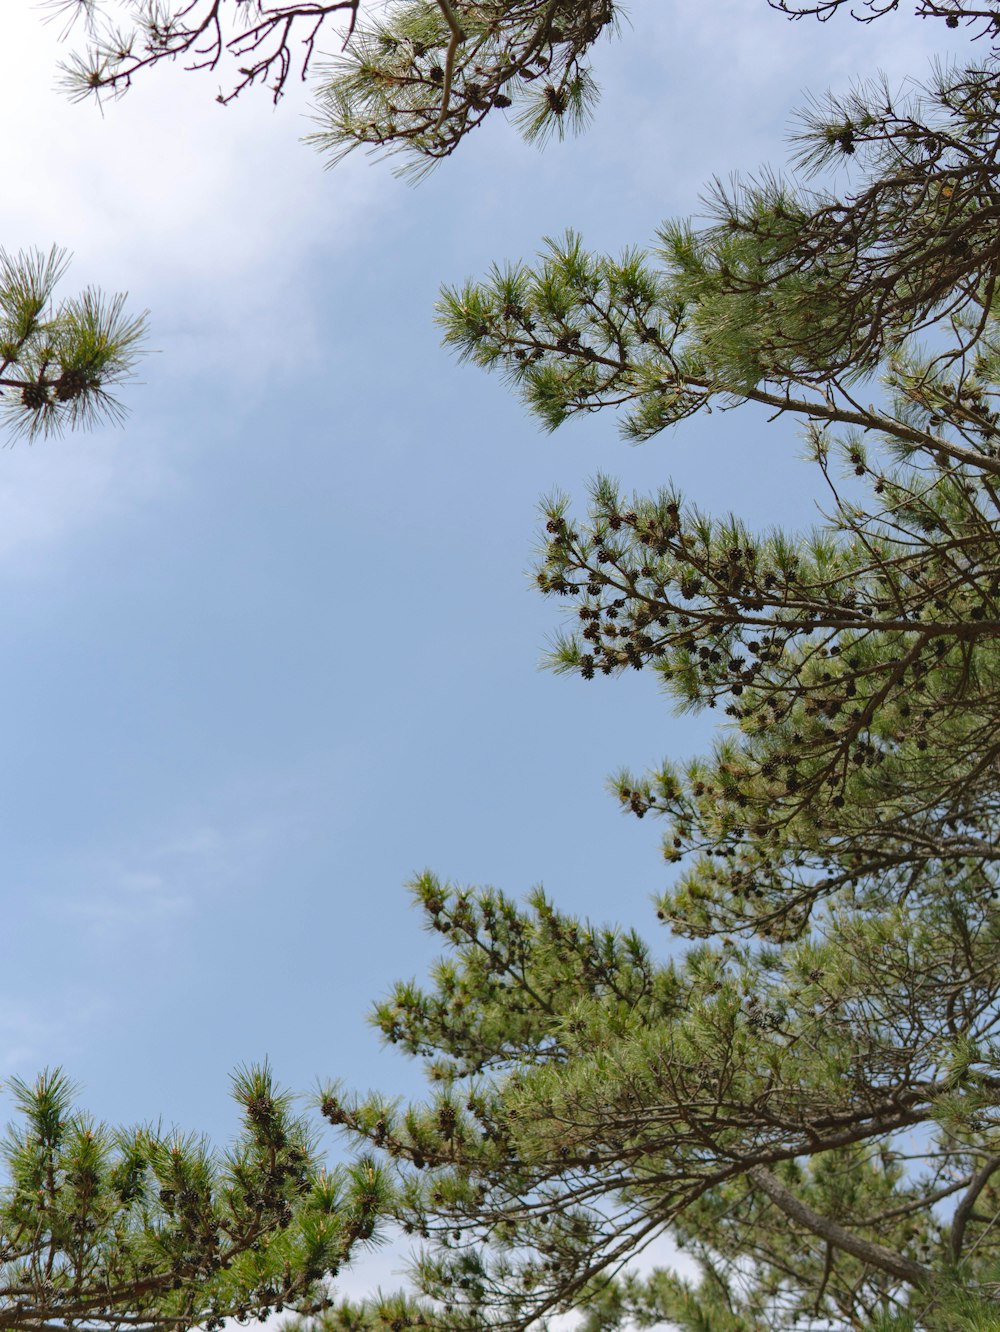 a bird is perched on top of a pine tree